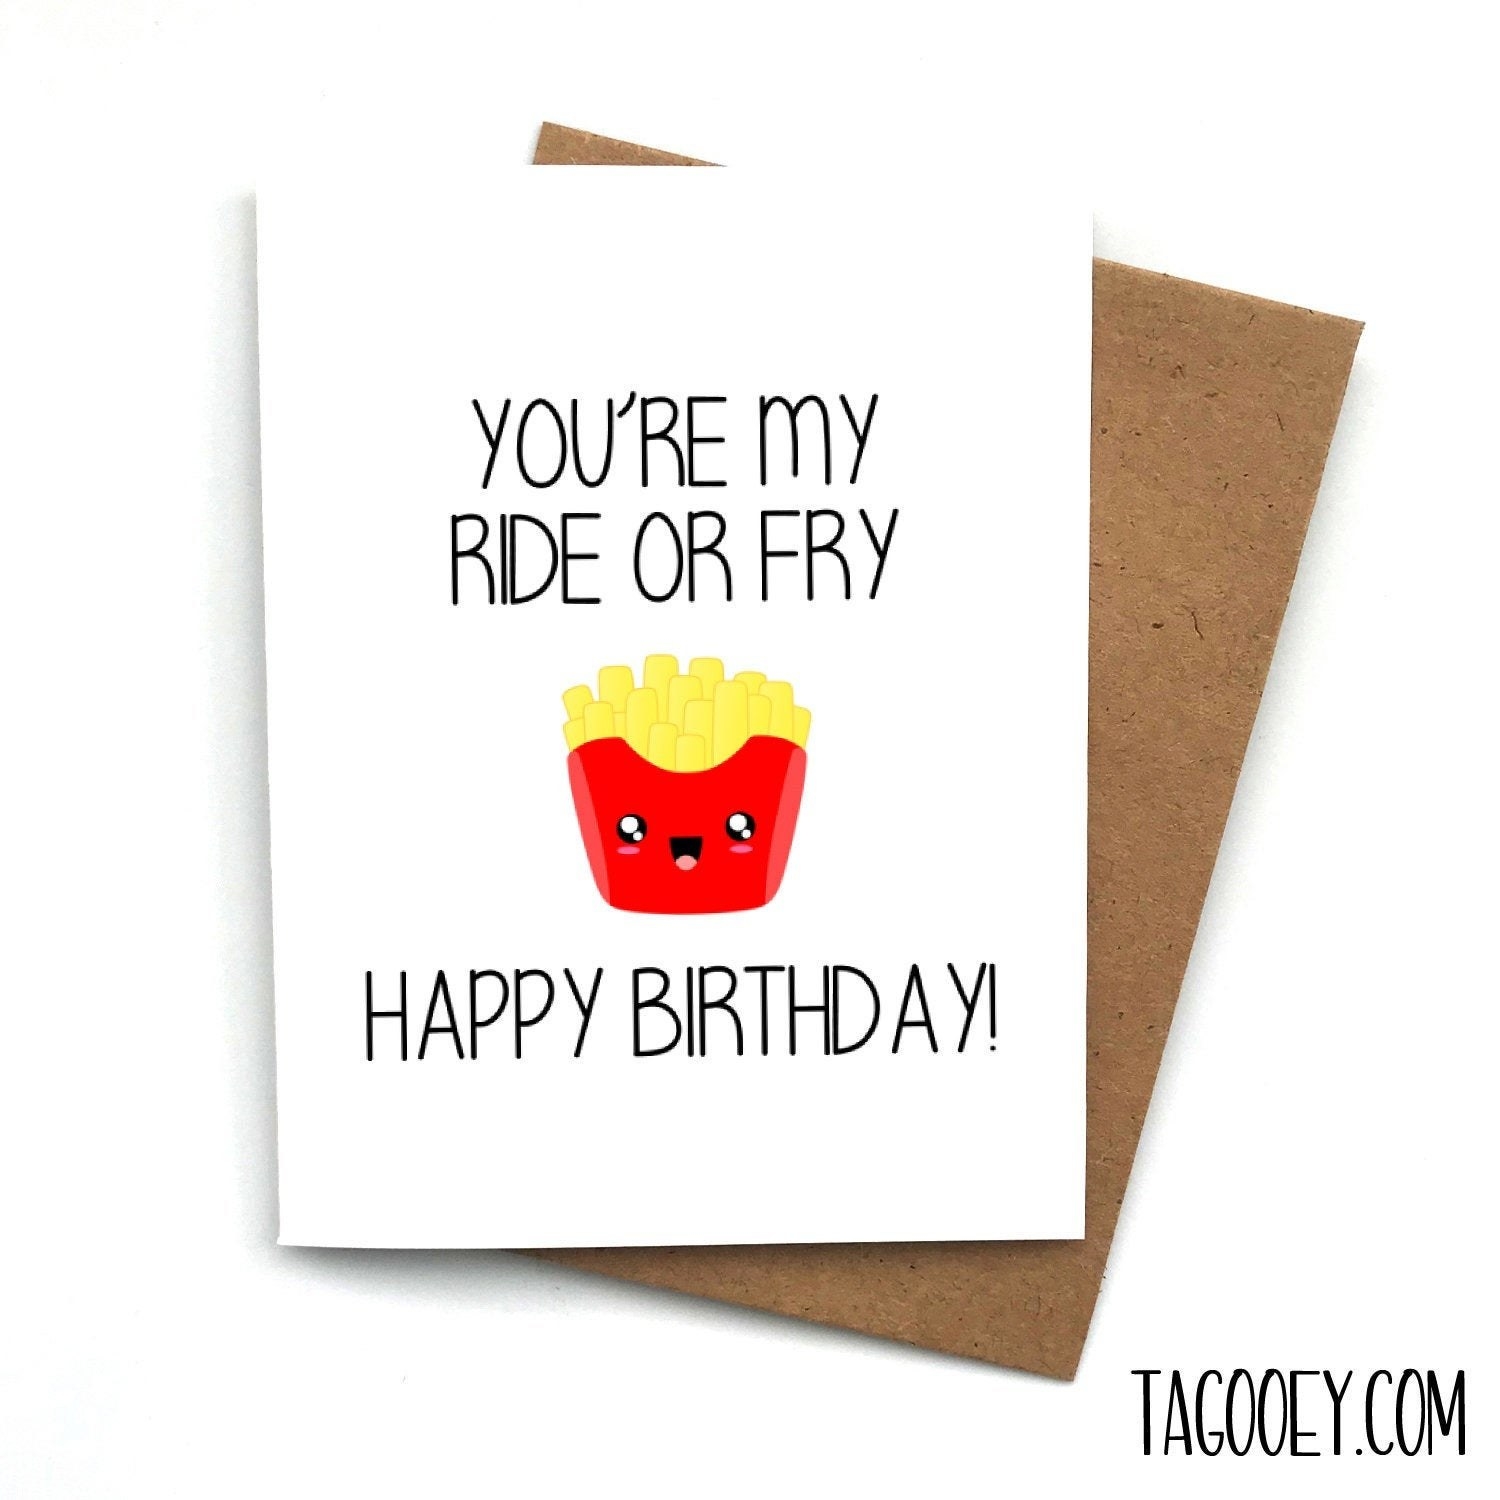 places-to-buy-birthday-cards-happy-birthday-flowers